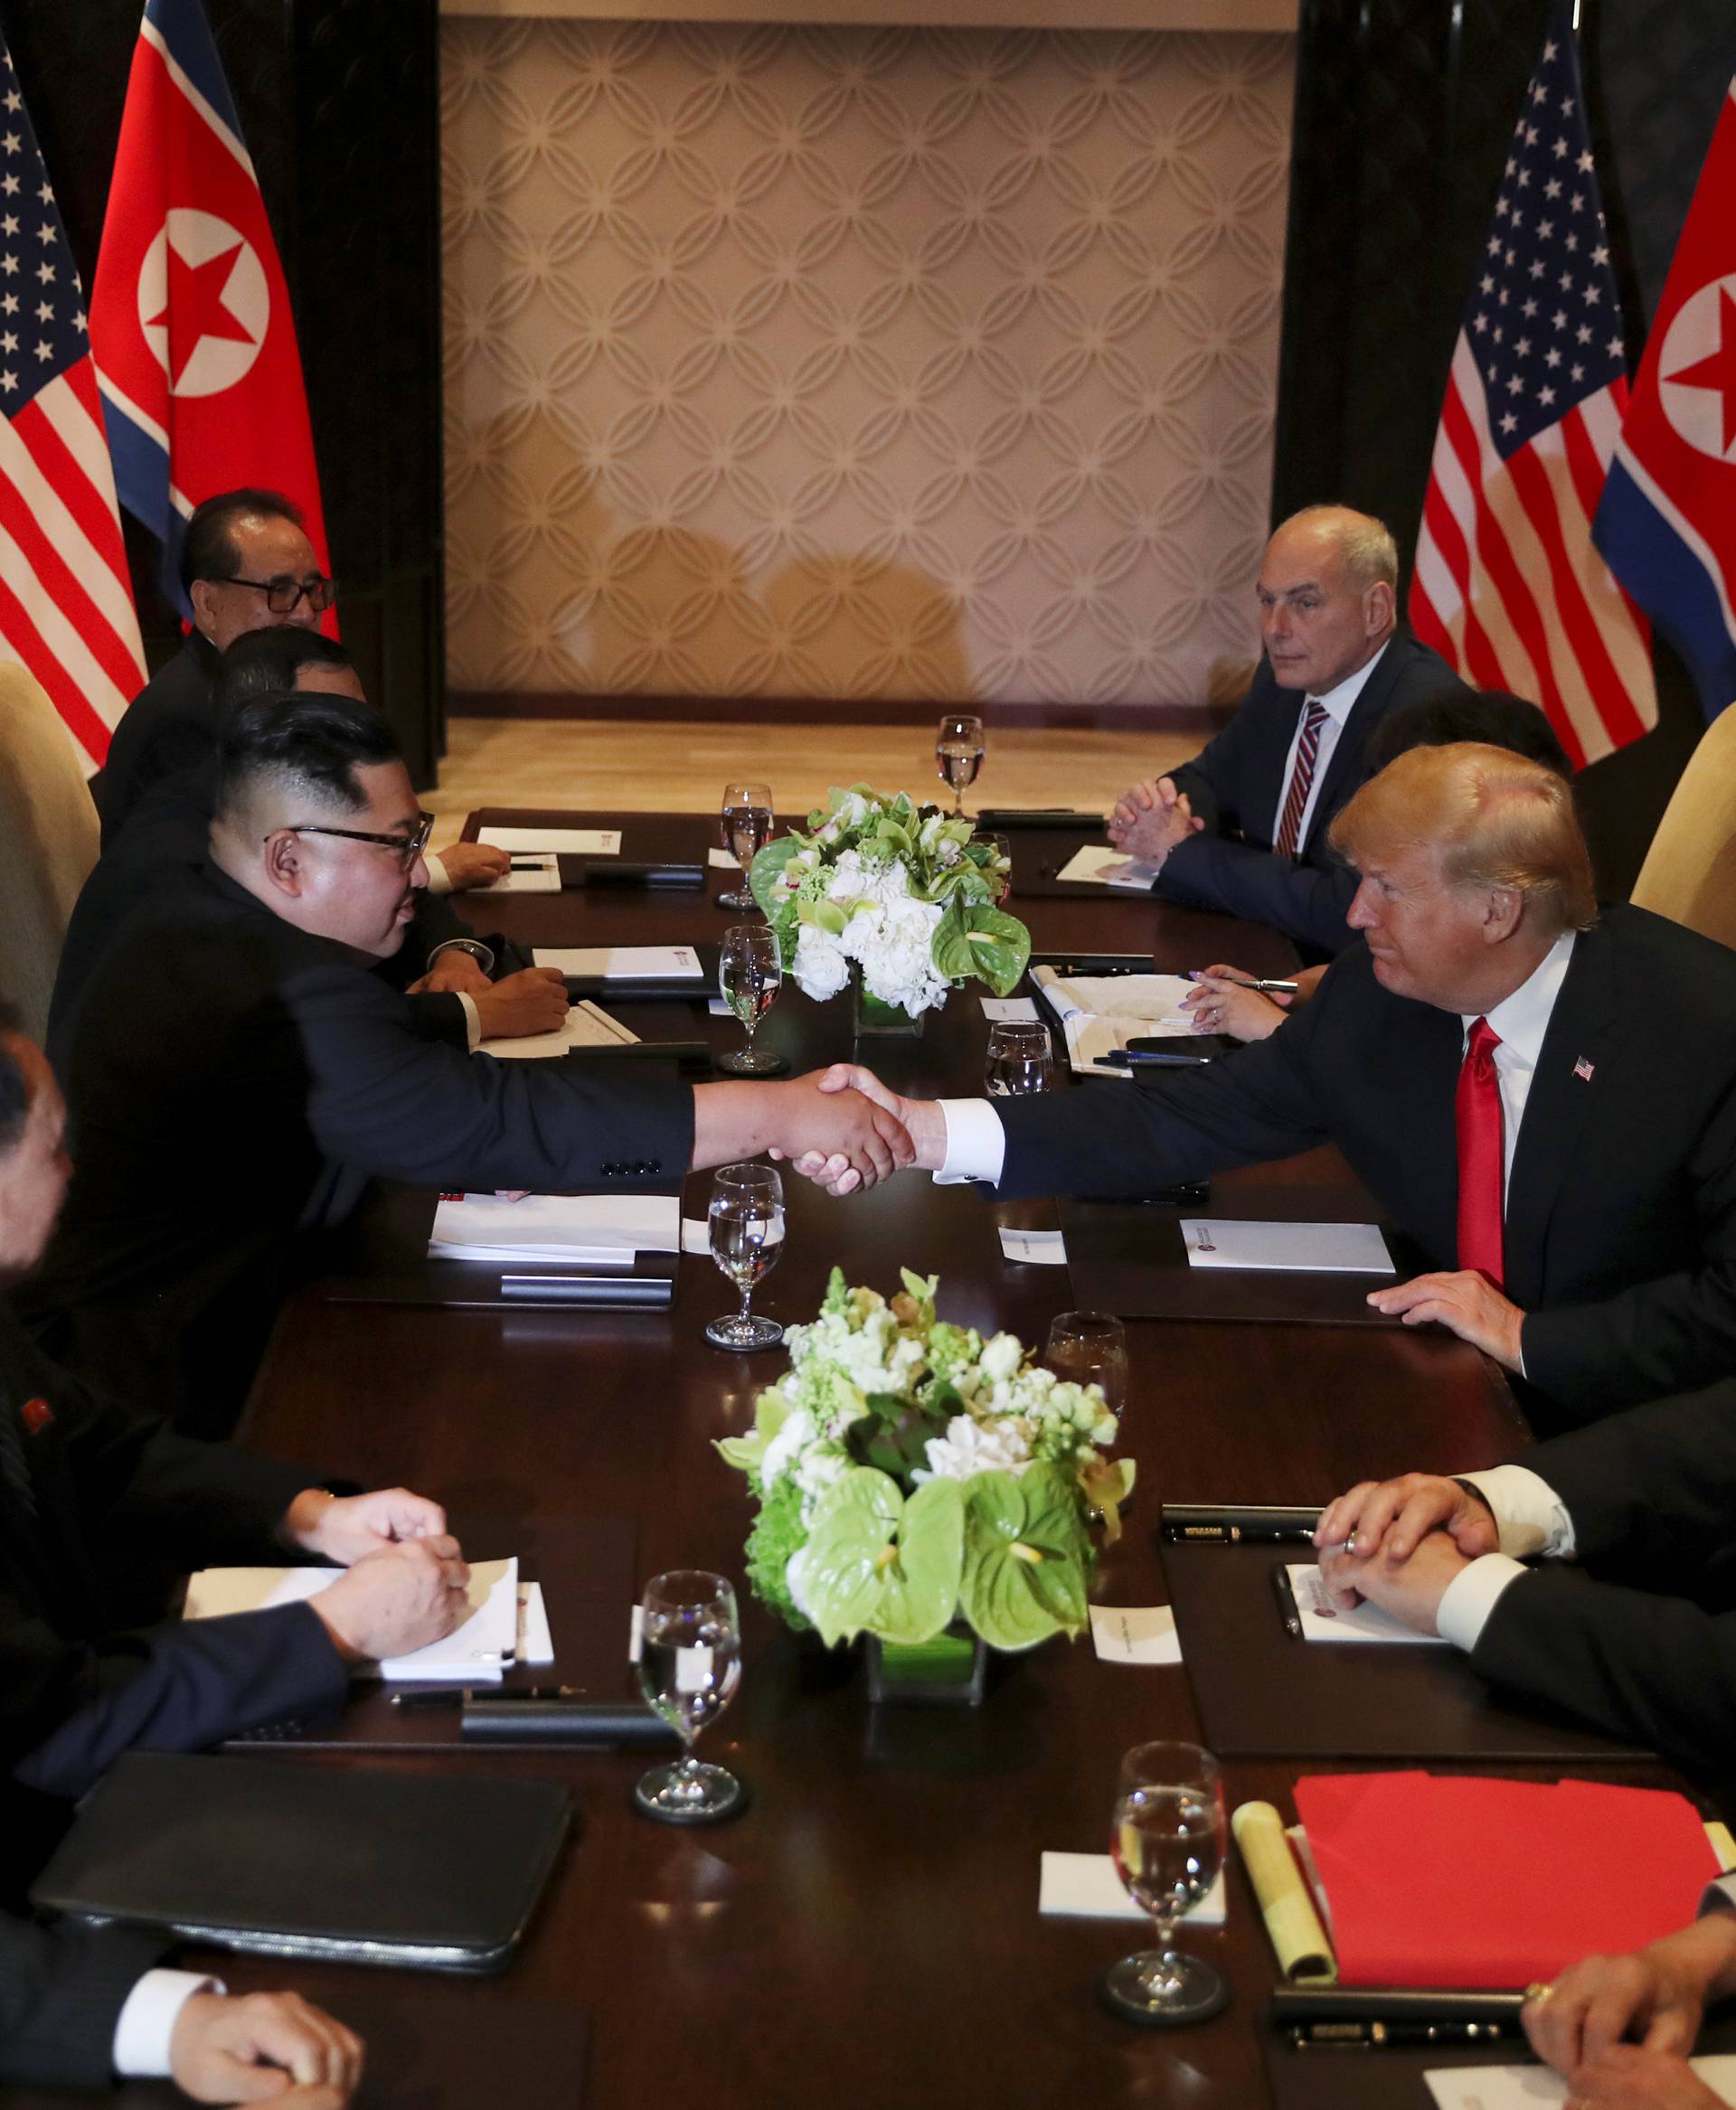 U.S. President Donald Trump shakes hands with North Korea's leader Kim Jong Un before their expanded bilateral meeting in Singapore